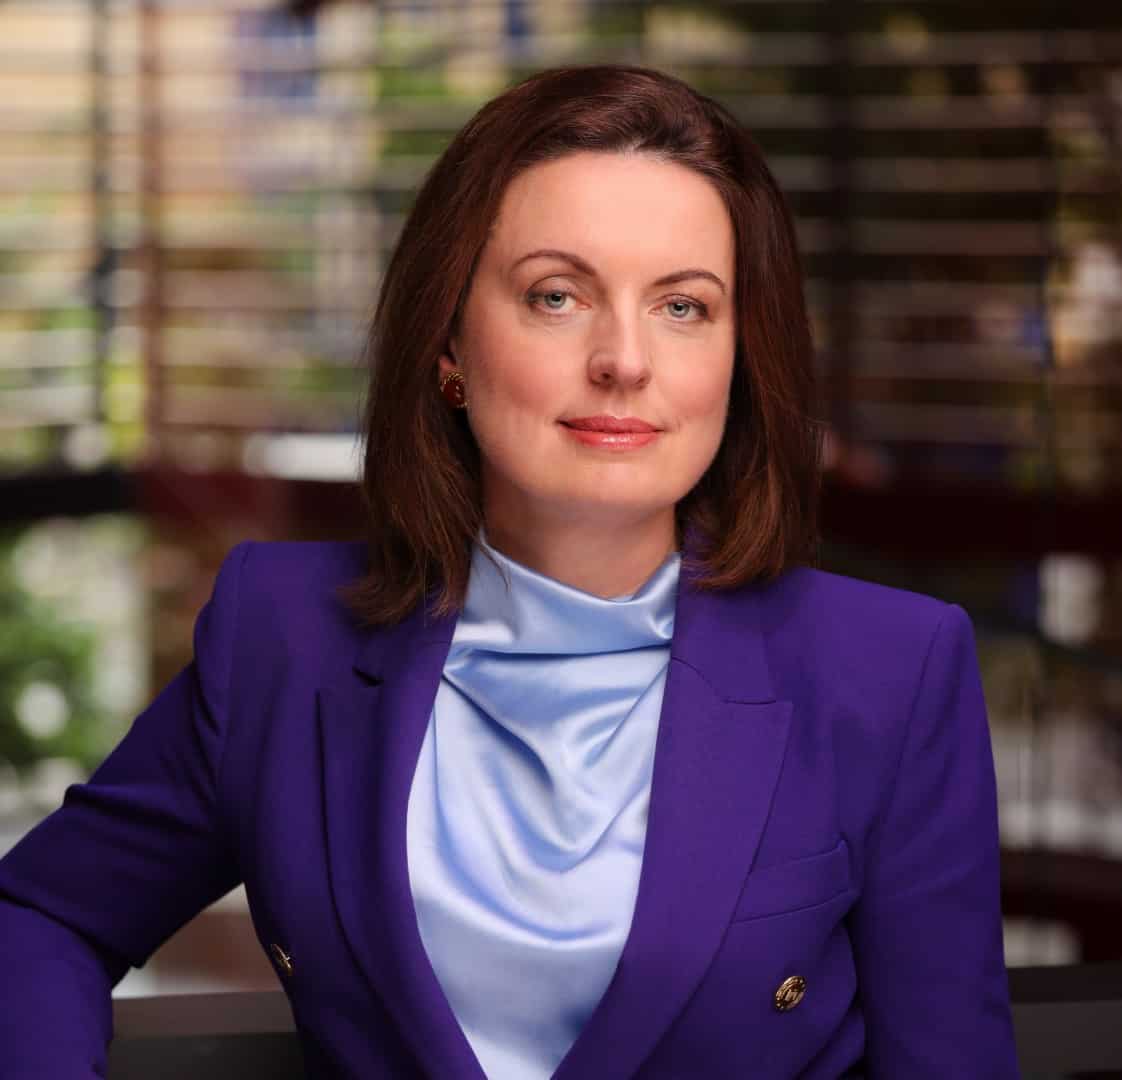 A headshot of Bridget Walsh appointed as Chair of The Ireland Funds Great Britain